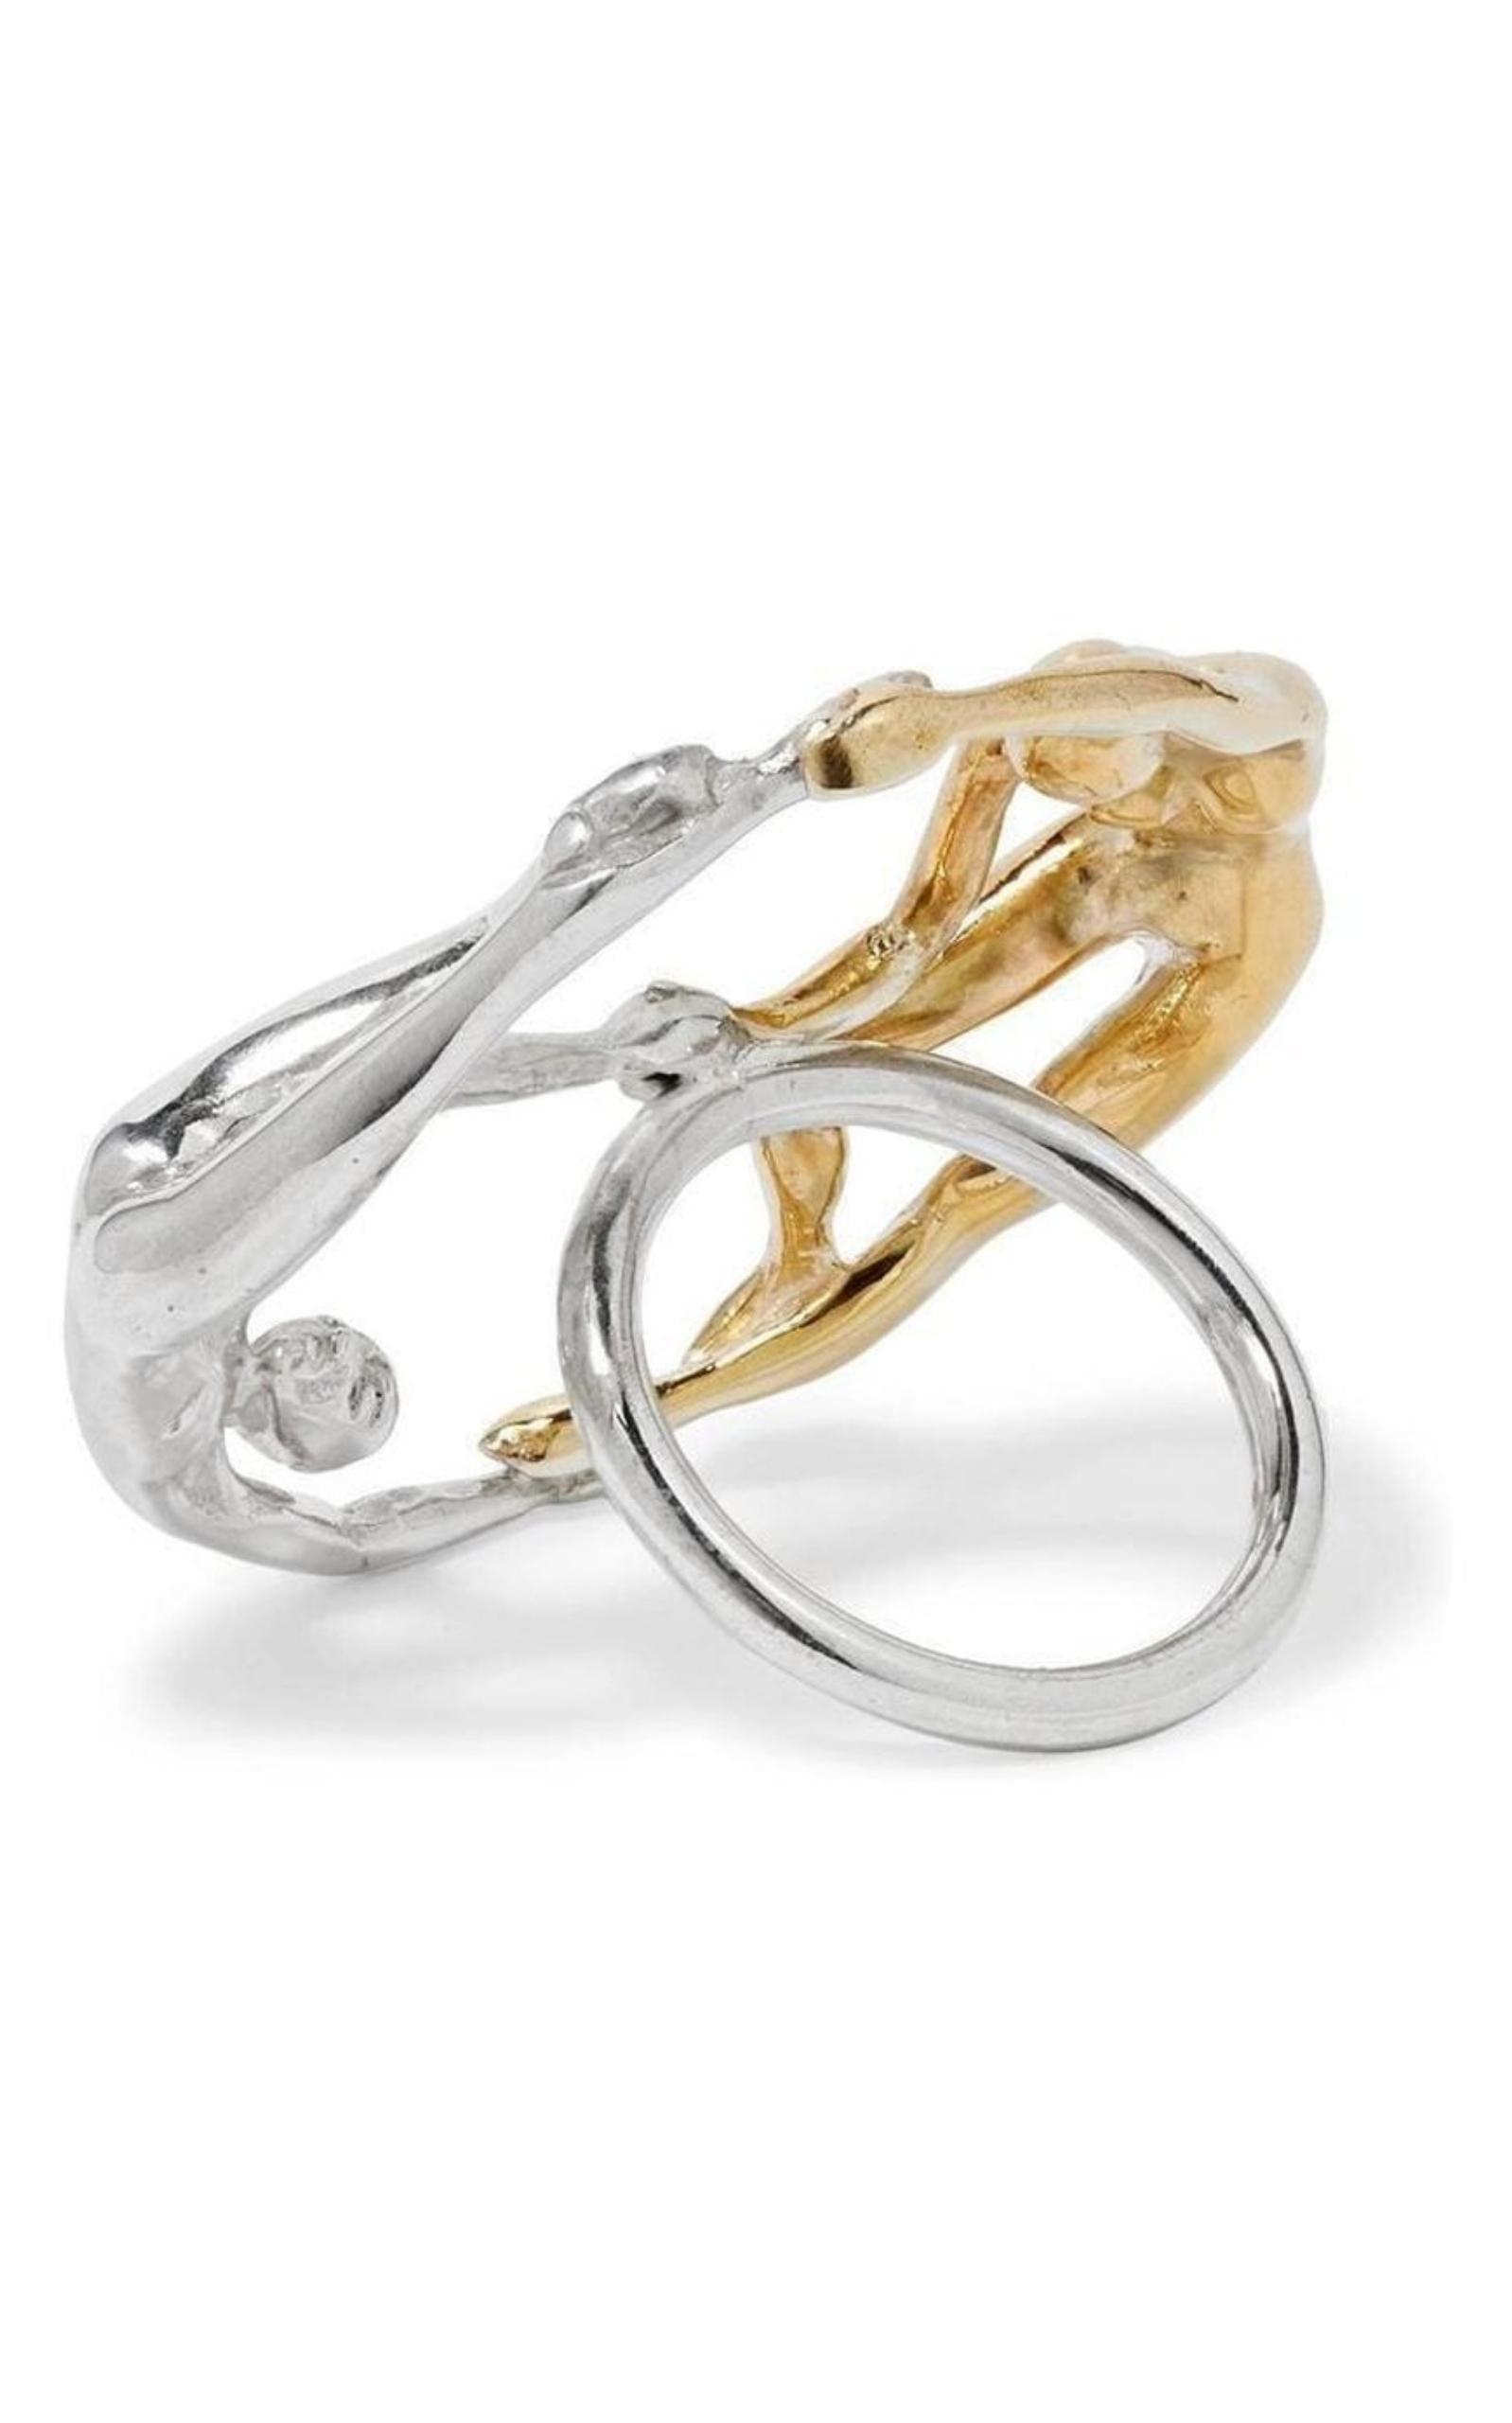  Paola VilasDança Sterling Silver and Gold-plated Ring - Runway Catalog